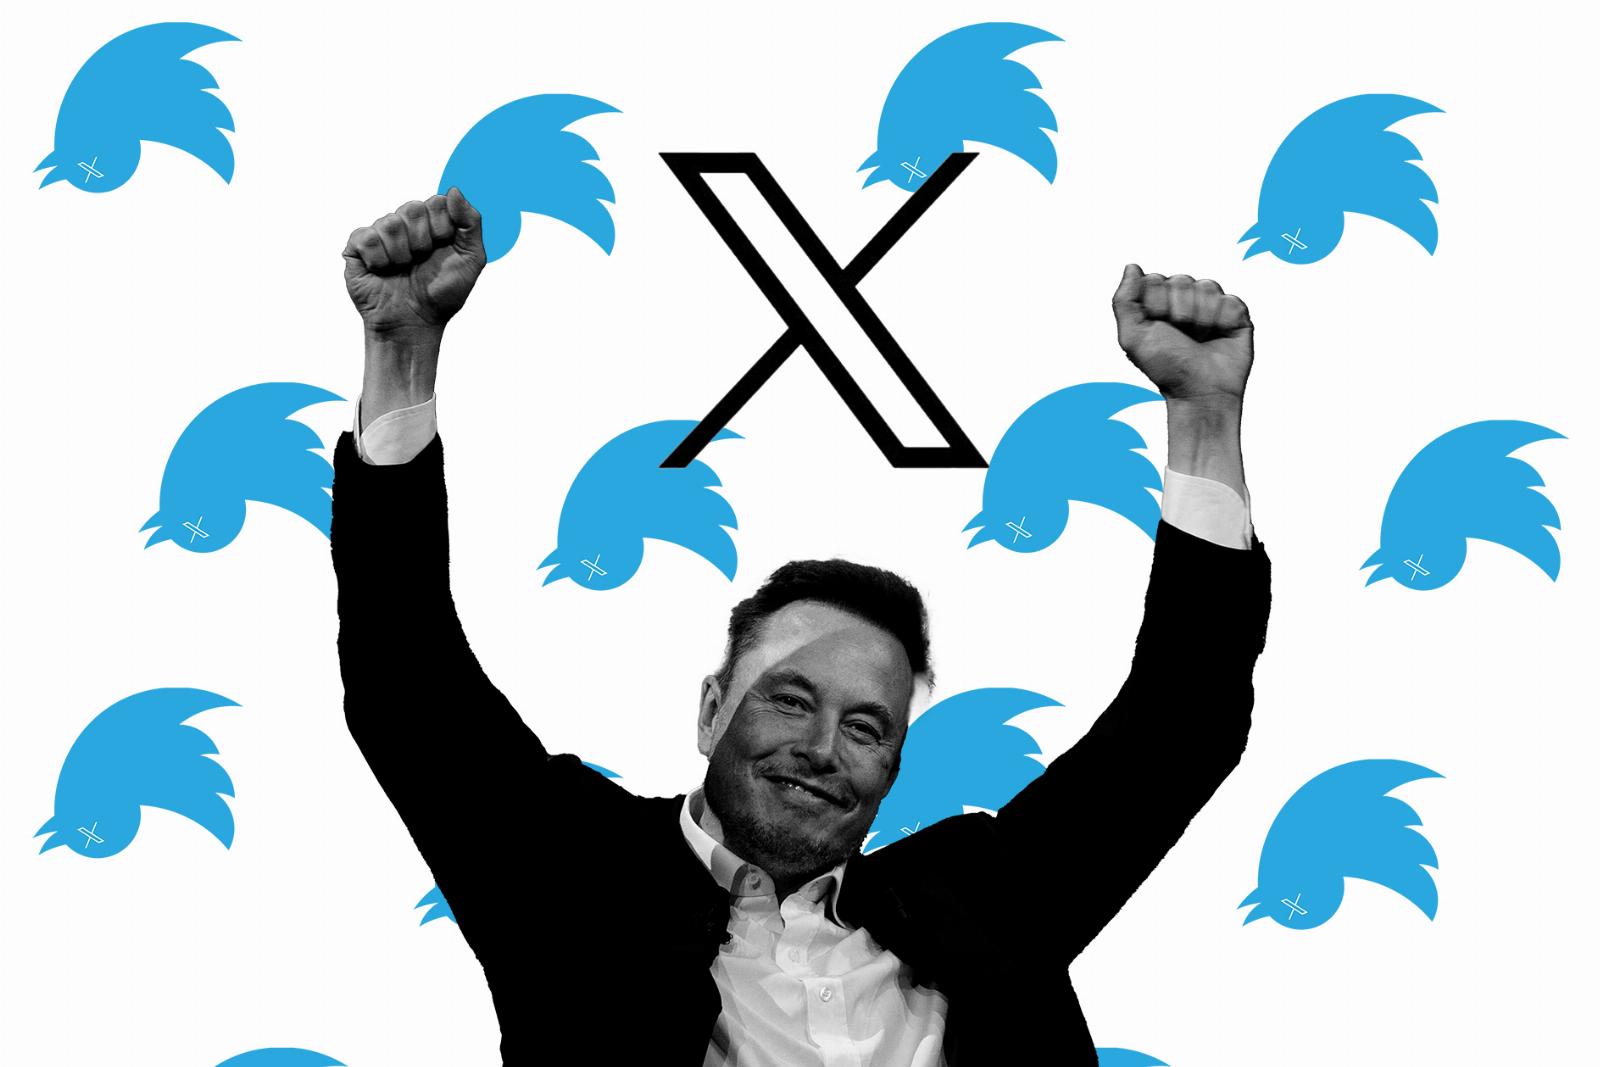 Owner of @x Twitter handle says no one reached out ahead of Twitter’s rebranding to ‘X’